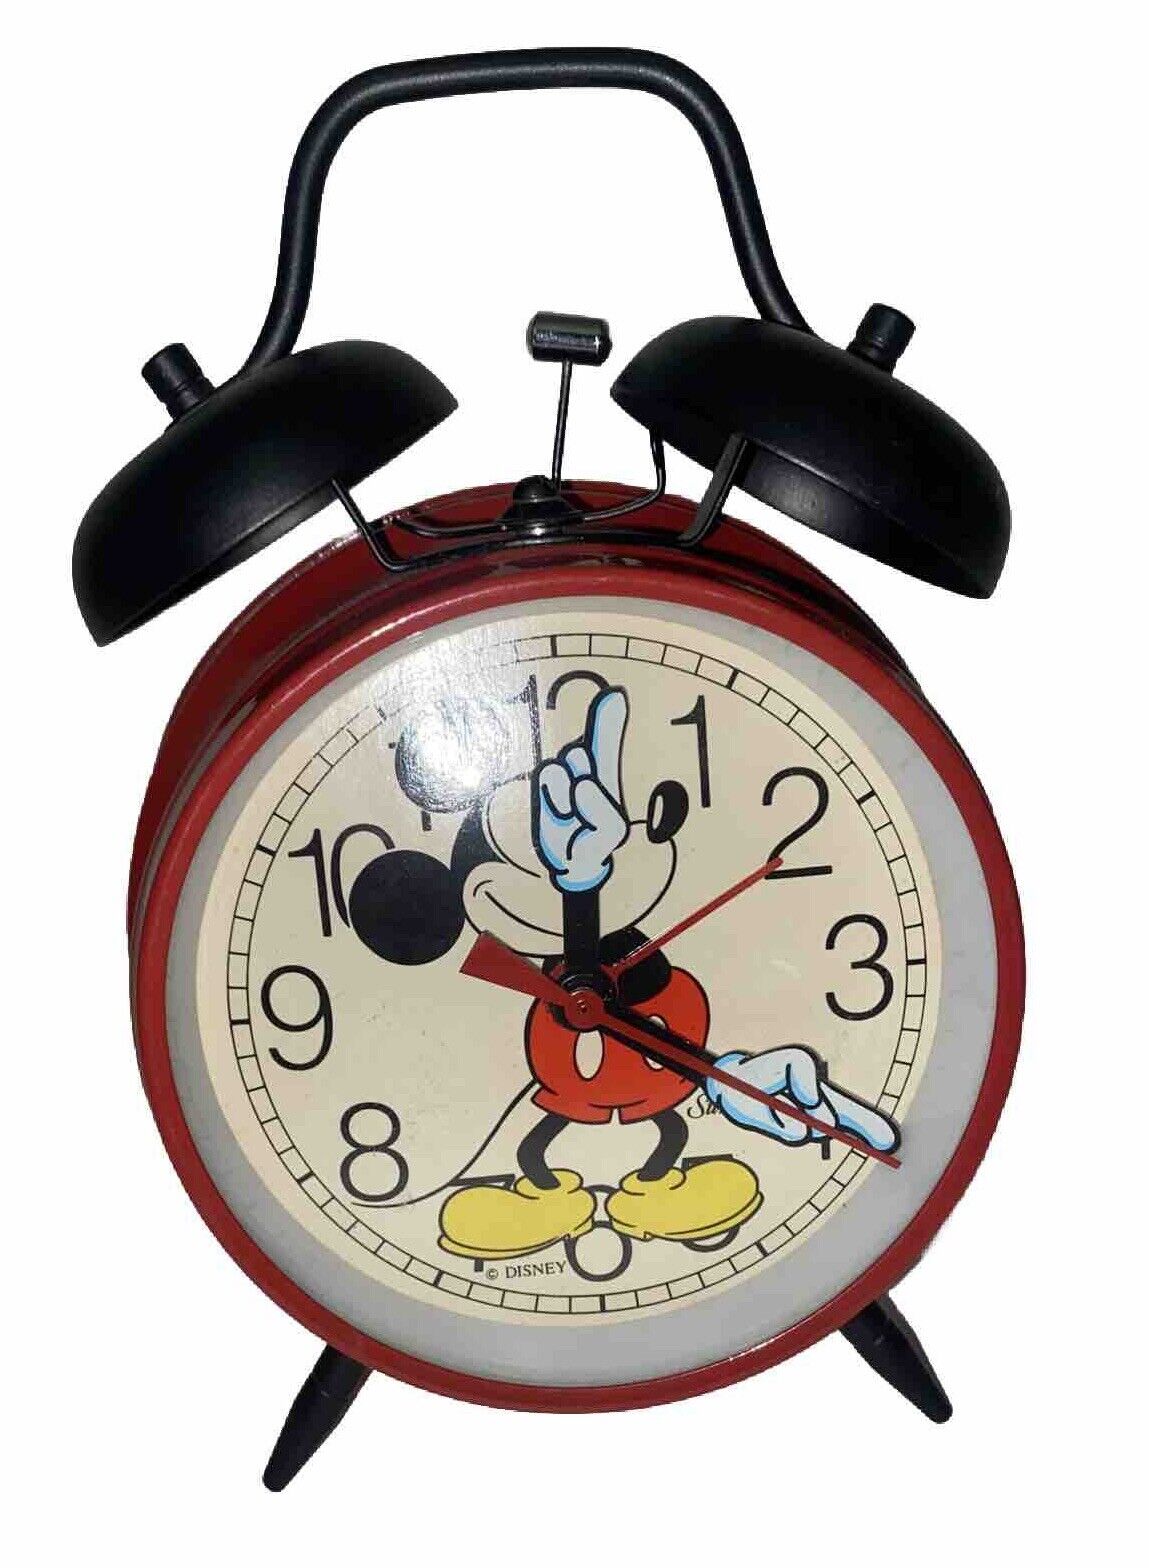 Vintage Disney Mickey Mouse Red Black Double Bell Alarm Clock Sunbeam Tested